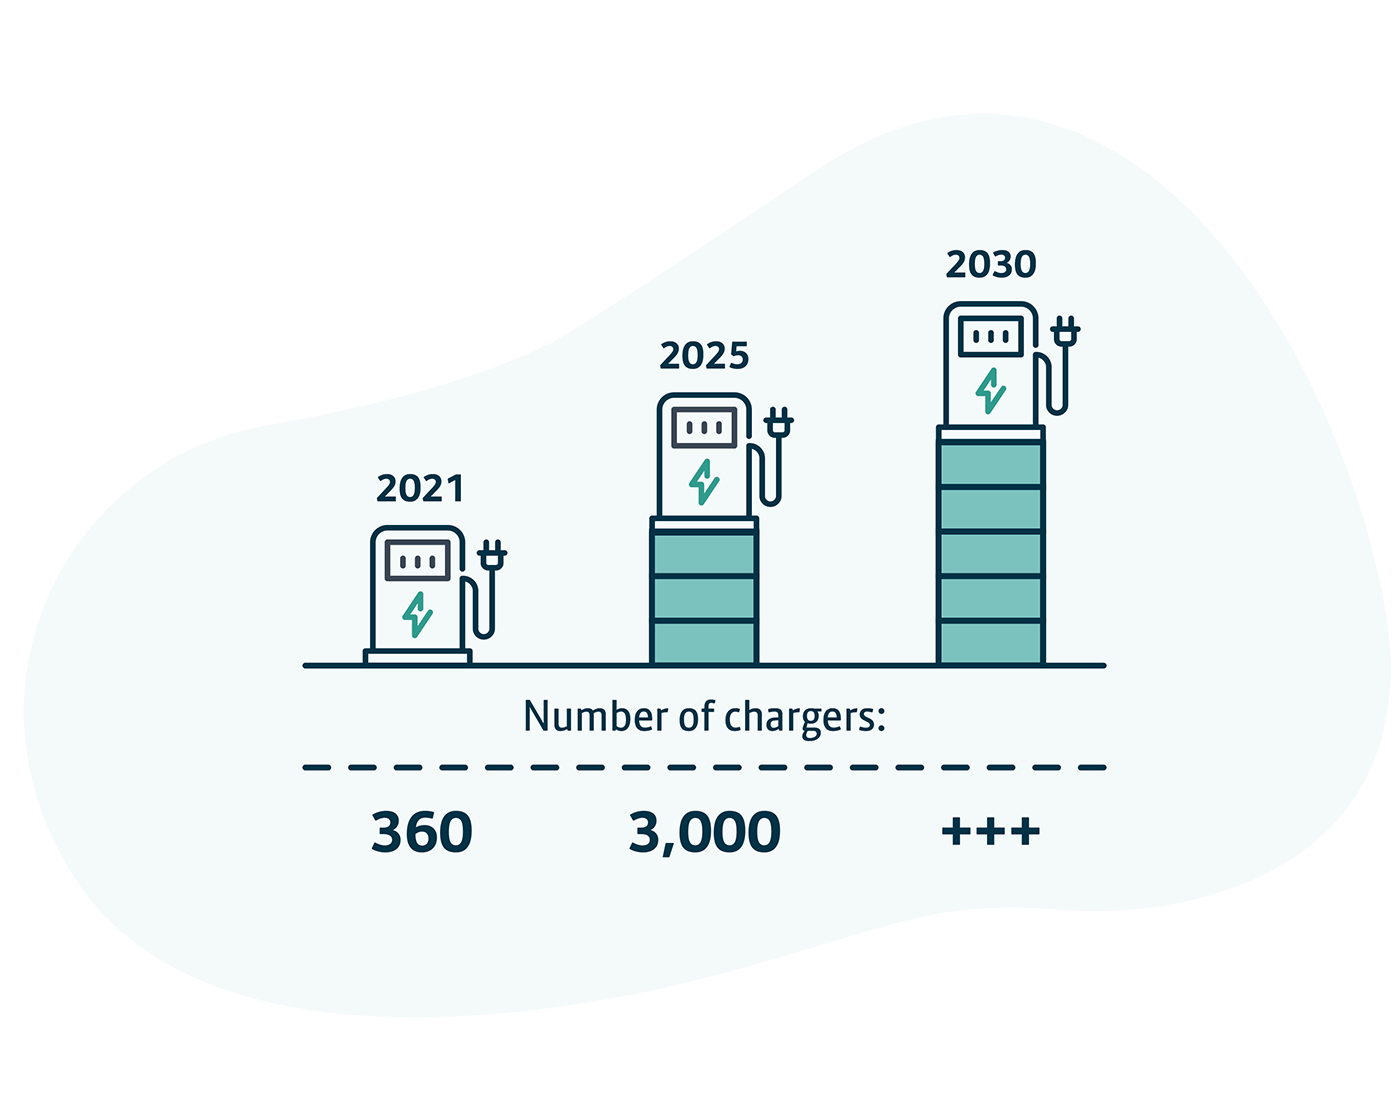 Timeline of charger numbers in Manchester from 360 now to 3000 in 2025 and beyond